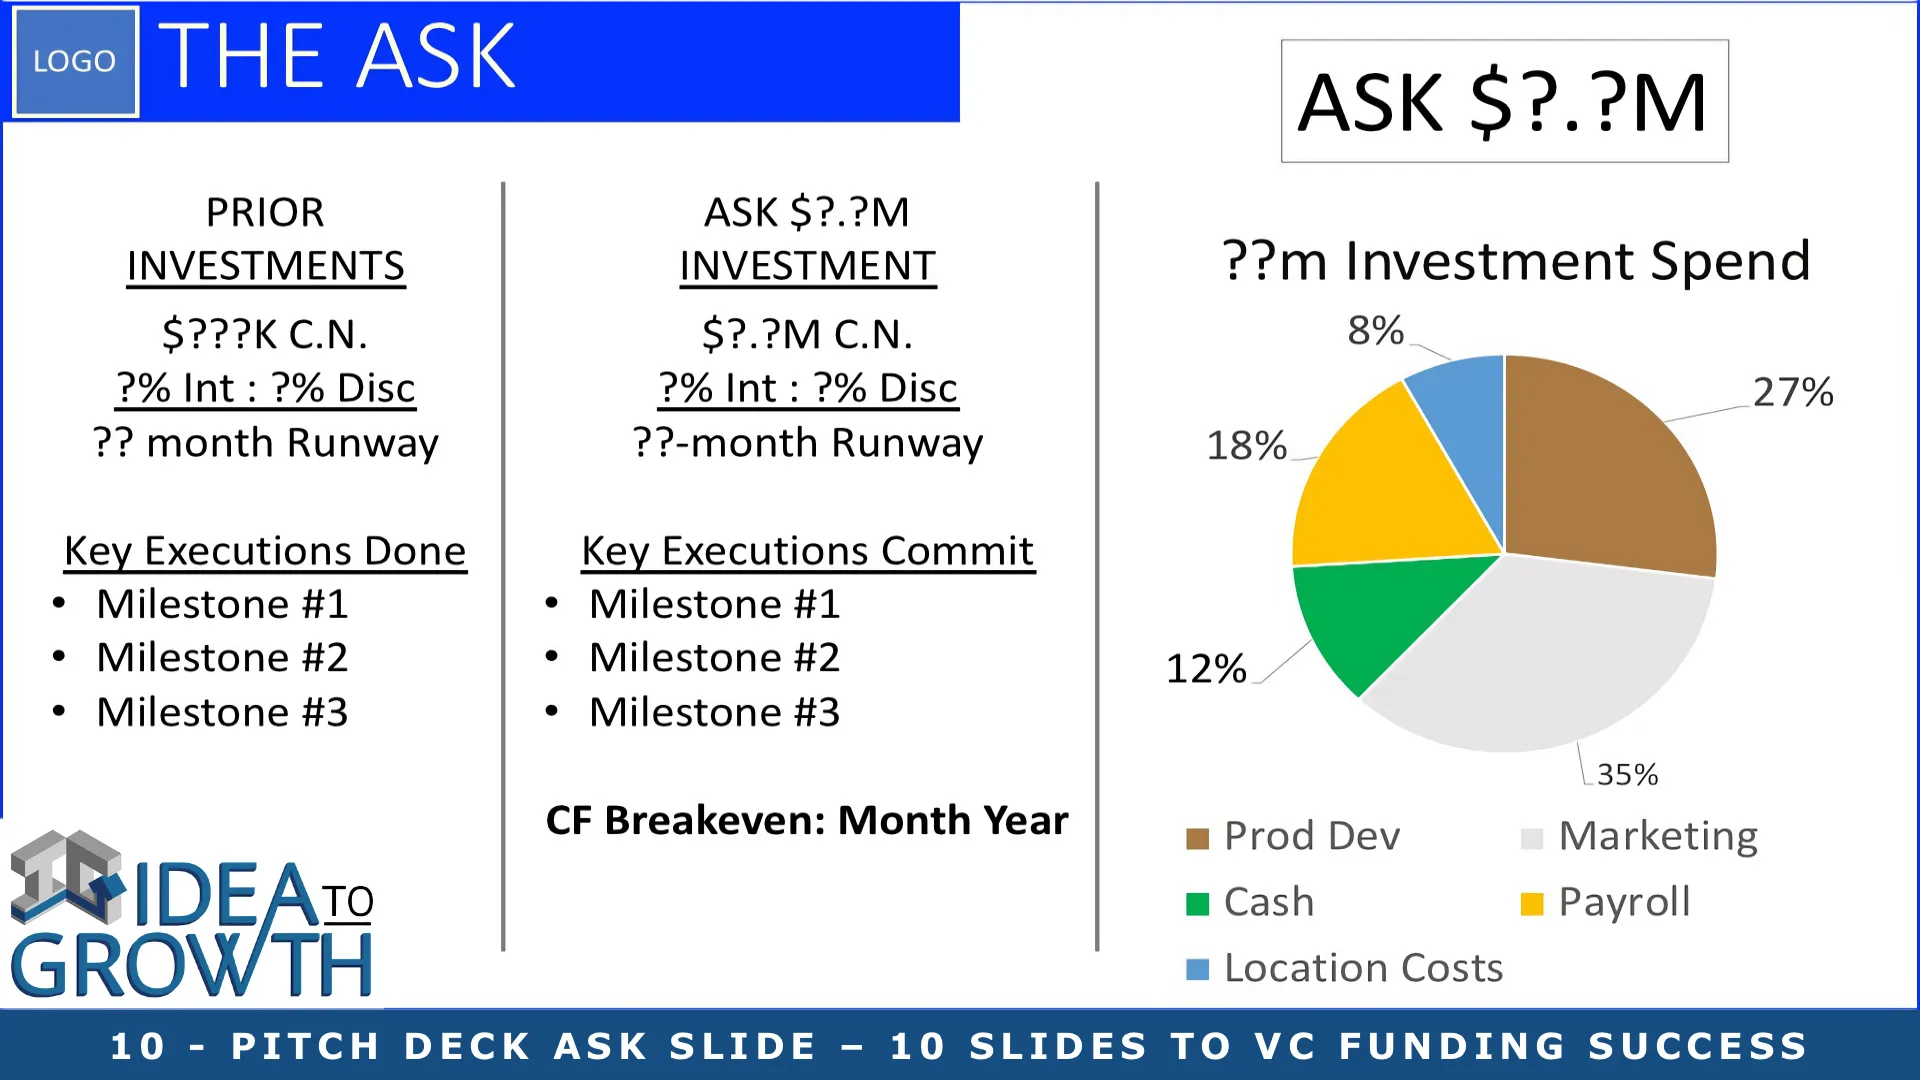 10 - PITCH DECK ASK SLIDE – 10 SLIDES TO VC FUNDING SUCCESS